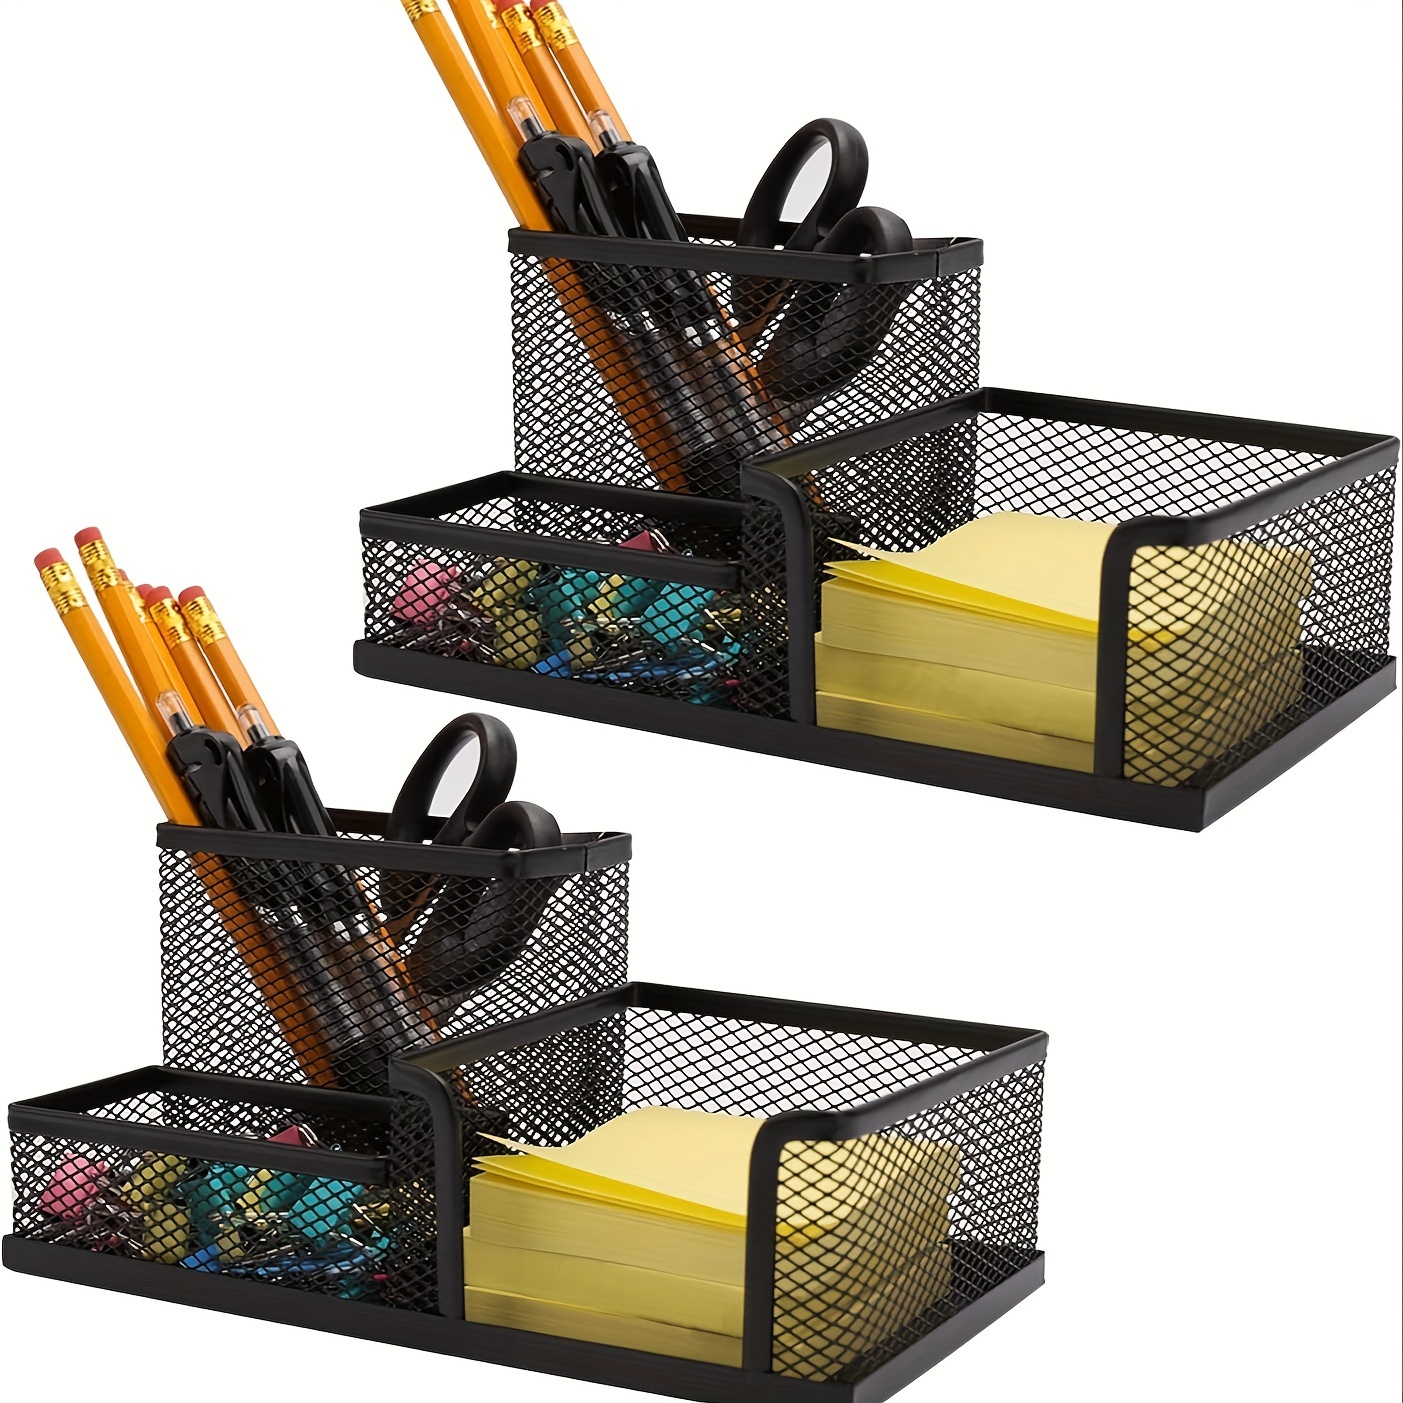 

1pc Sleek Black Metal Pen Holder With 3 Compartments - Durable Iron Craft Desk Organizer For Office And Student Stationery Storage